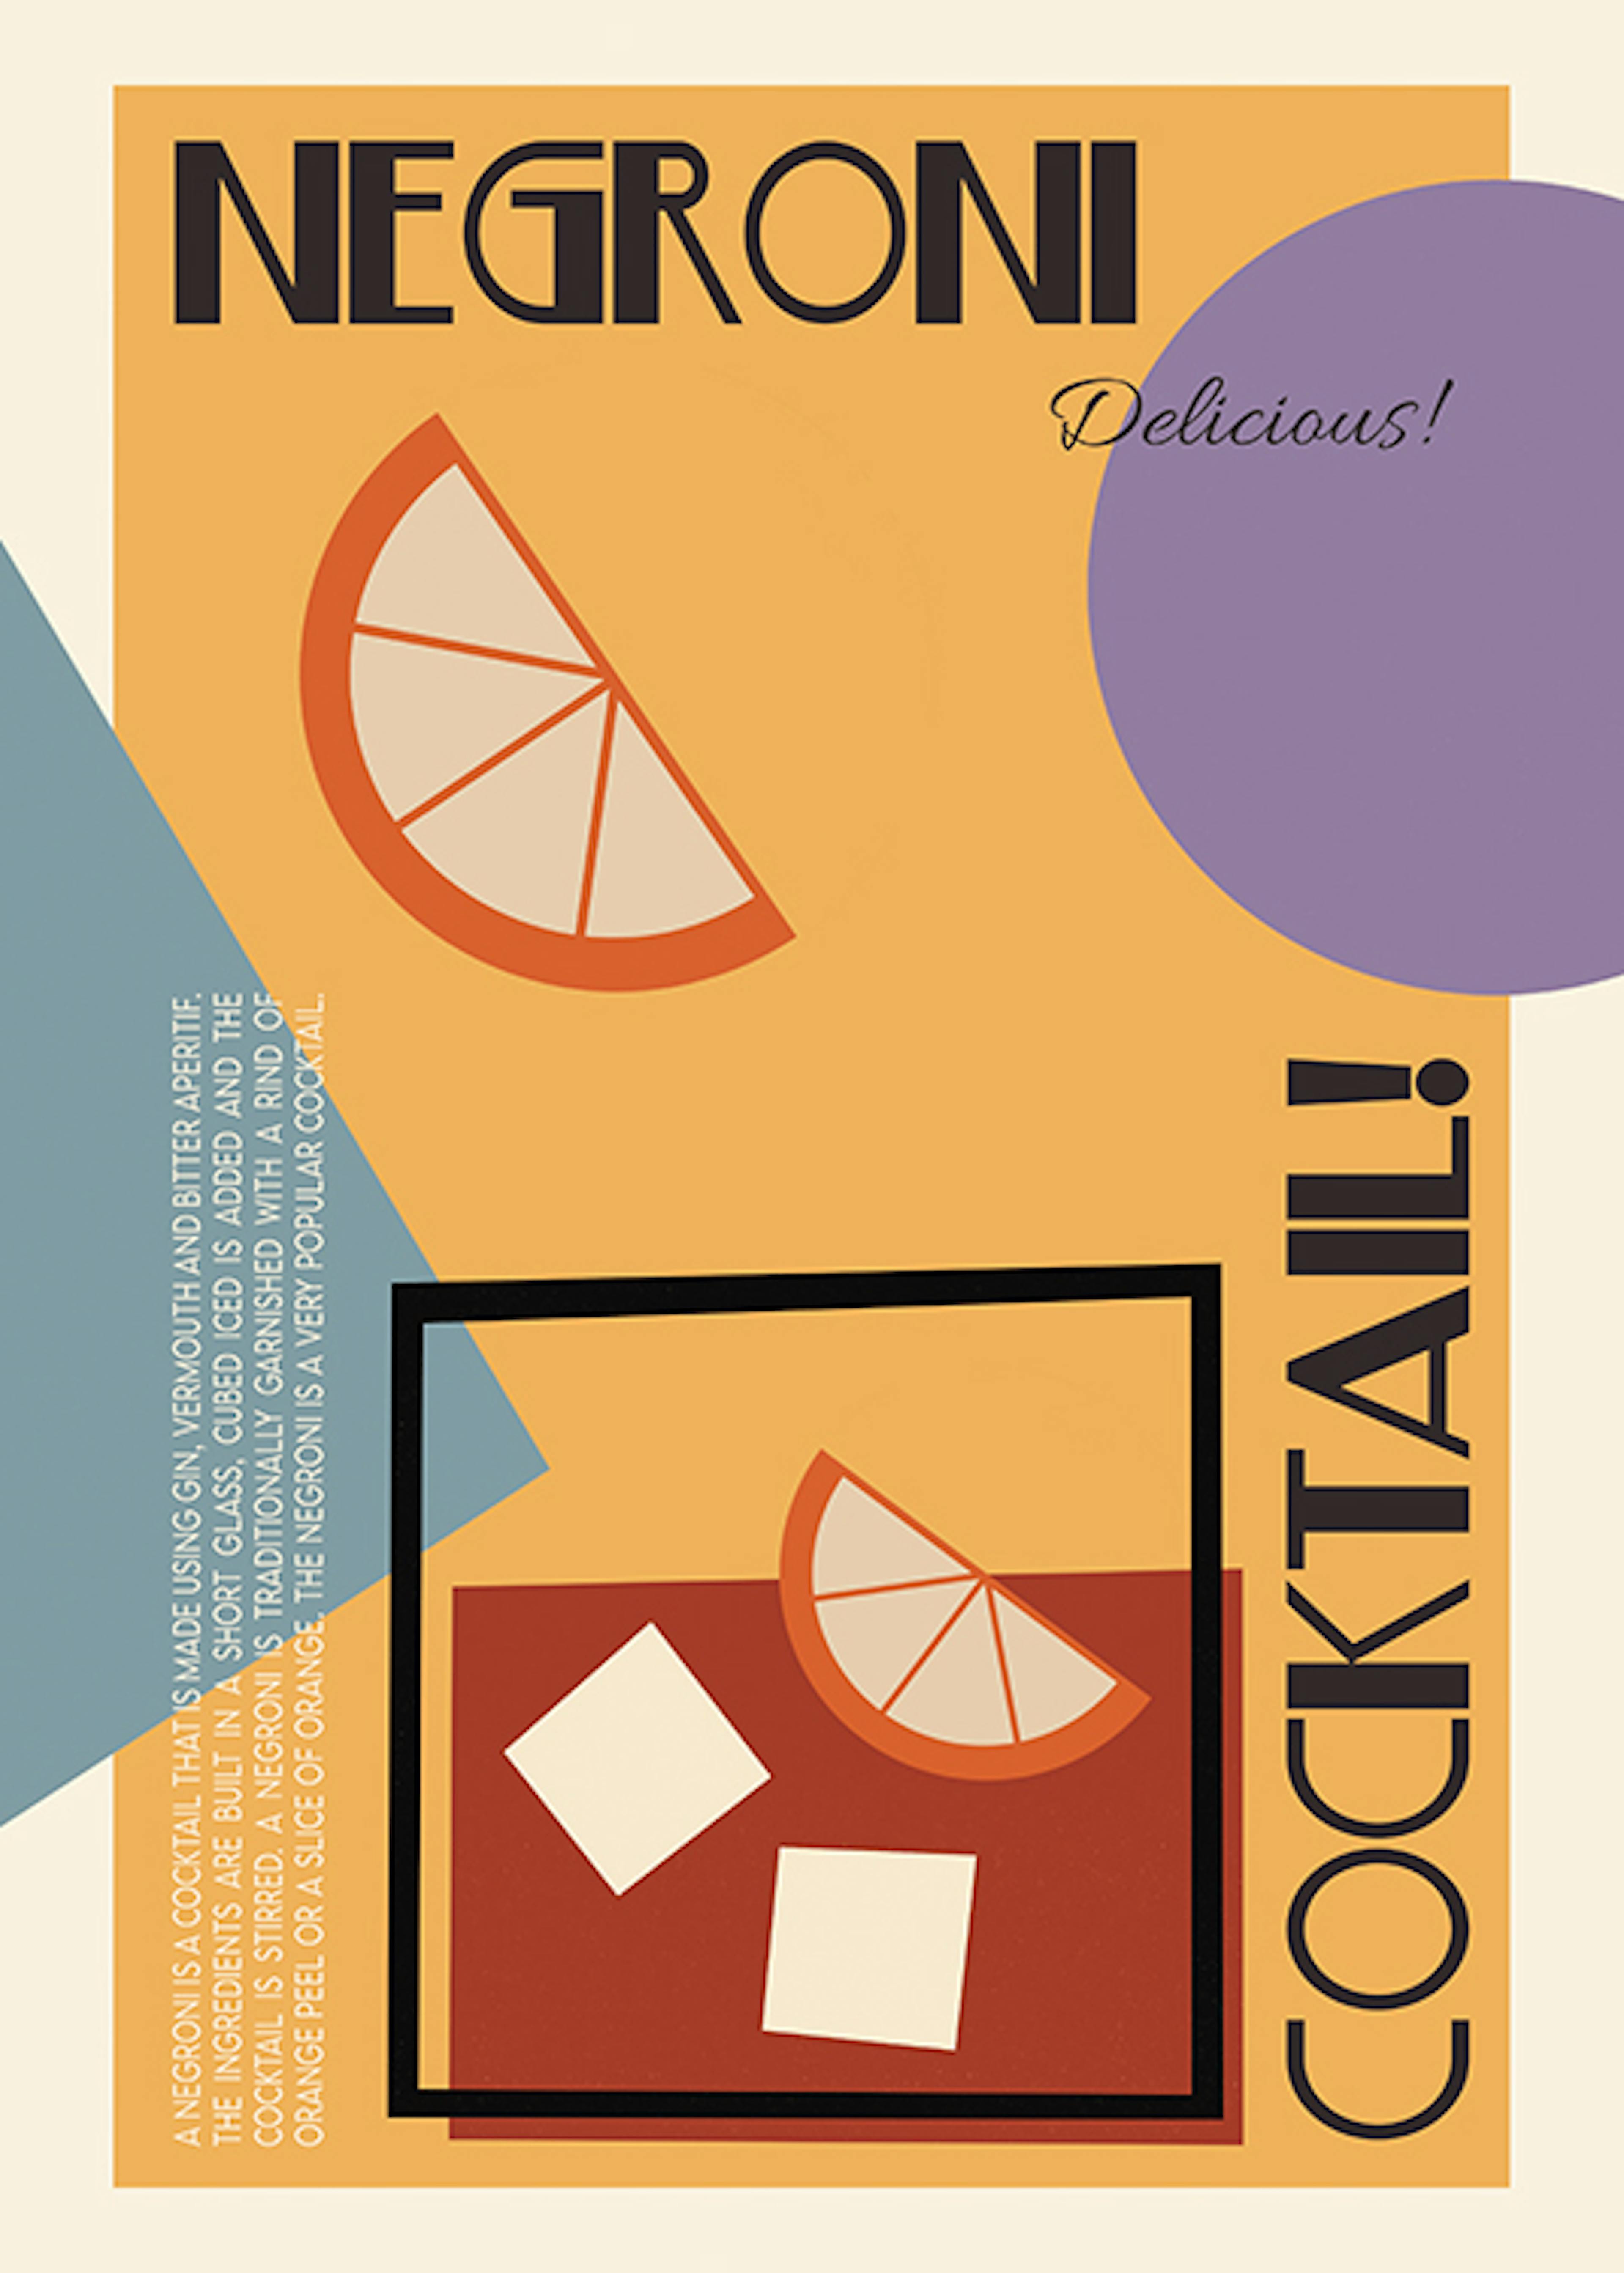 We made something nice - The Negroni Affiche 0